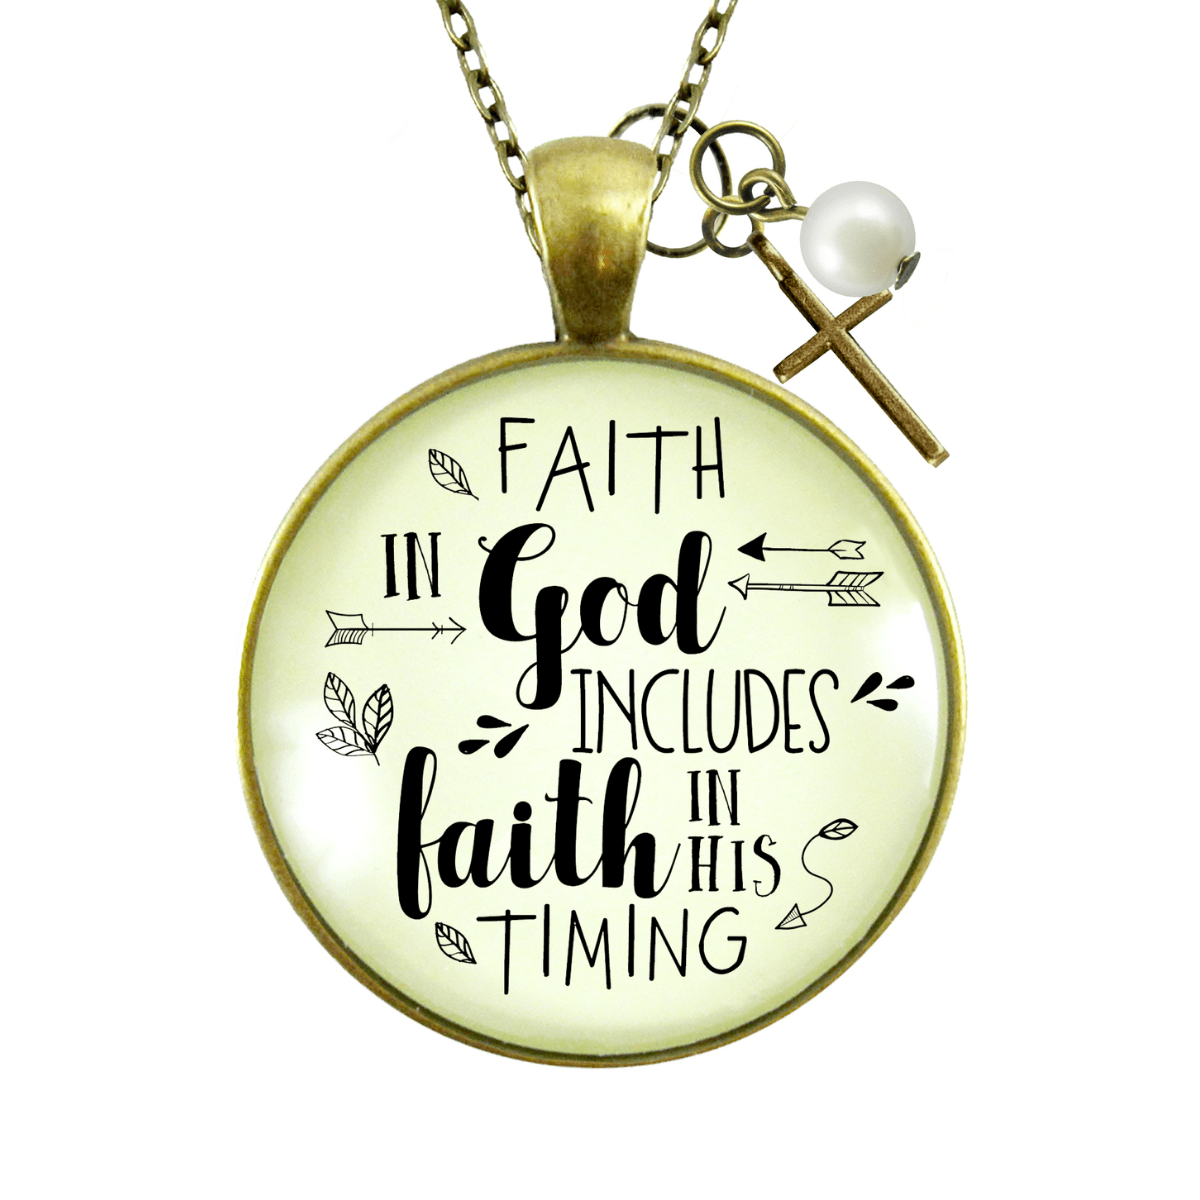 Gutsy Goodness Life Quote Necklace Includes Faith In His Timing Charm Jewelry - Gutsy Goodness Handmade Jewelry;Life Quote Necklace Includes Faith In His Timing Charm Jewelry - Gutsy Goodness Handmade Jewelry Gifts